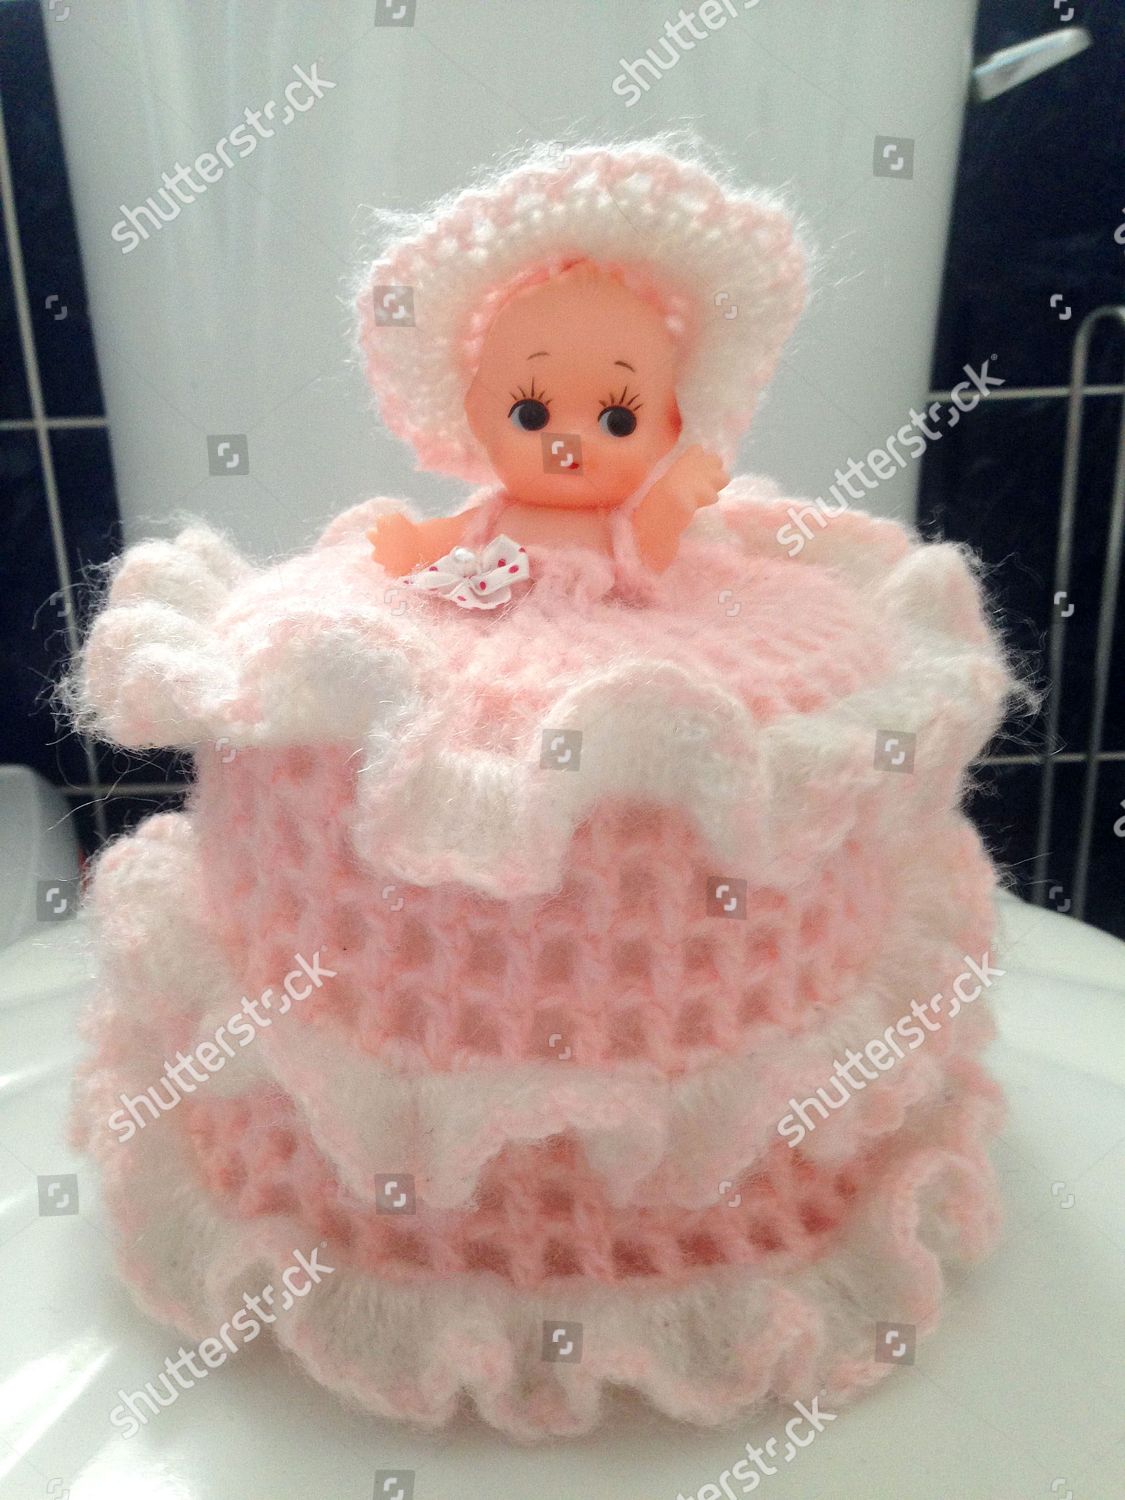 knitted toilet roll cover dolls